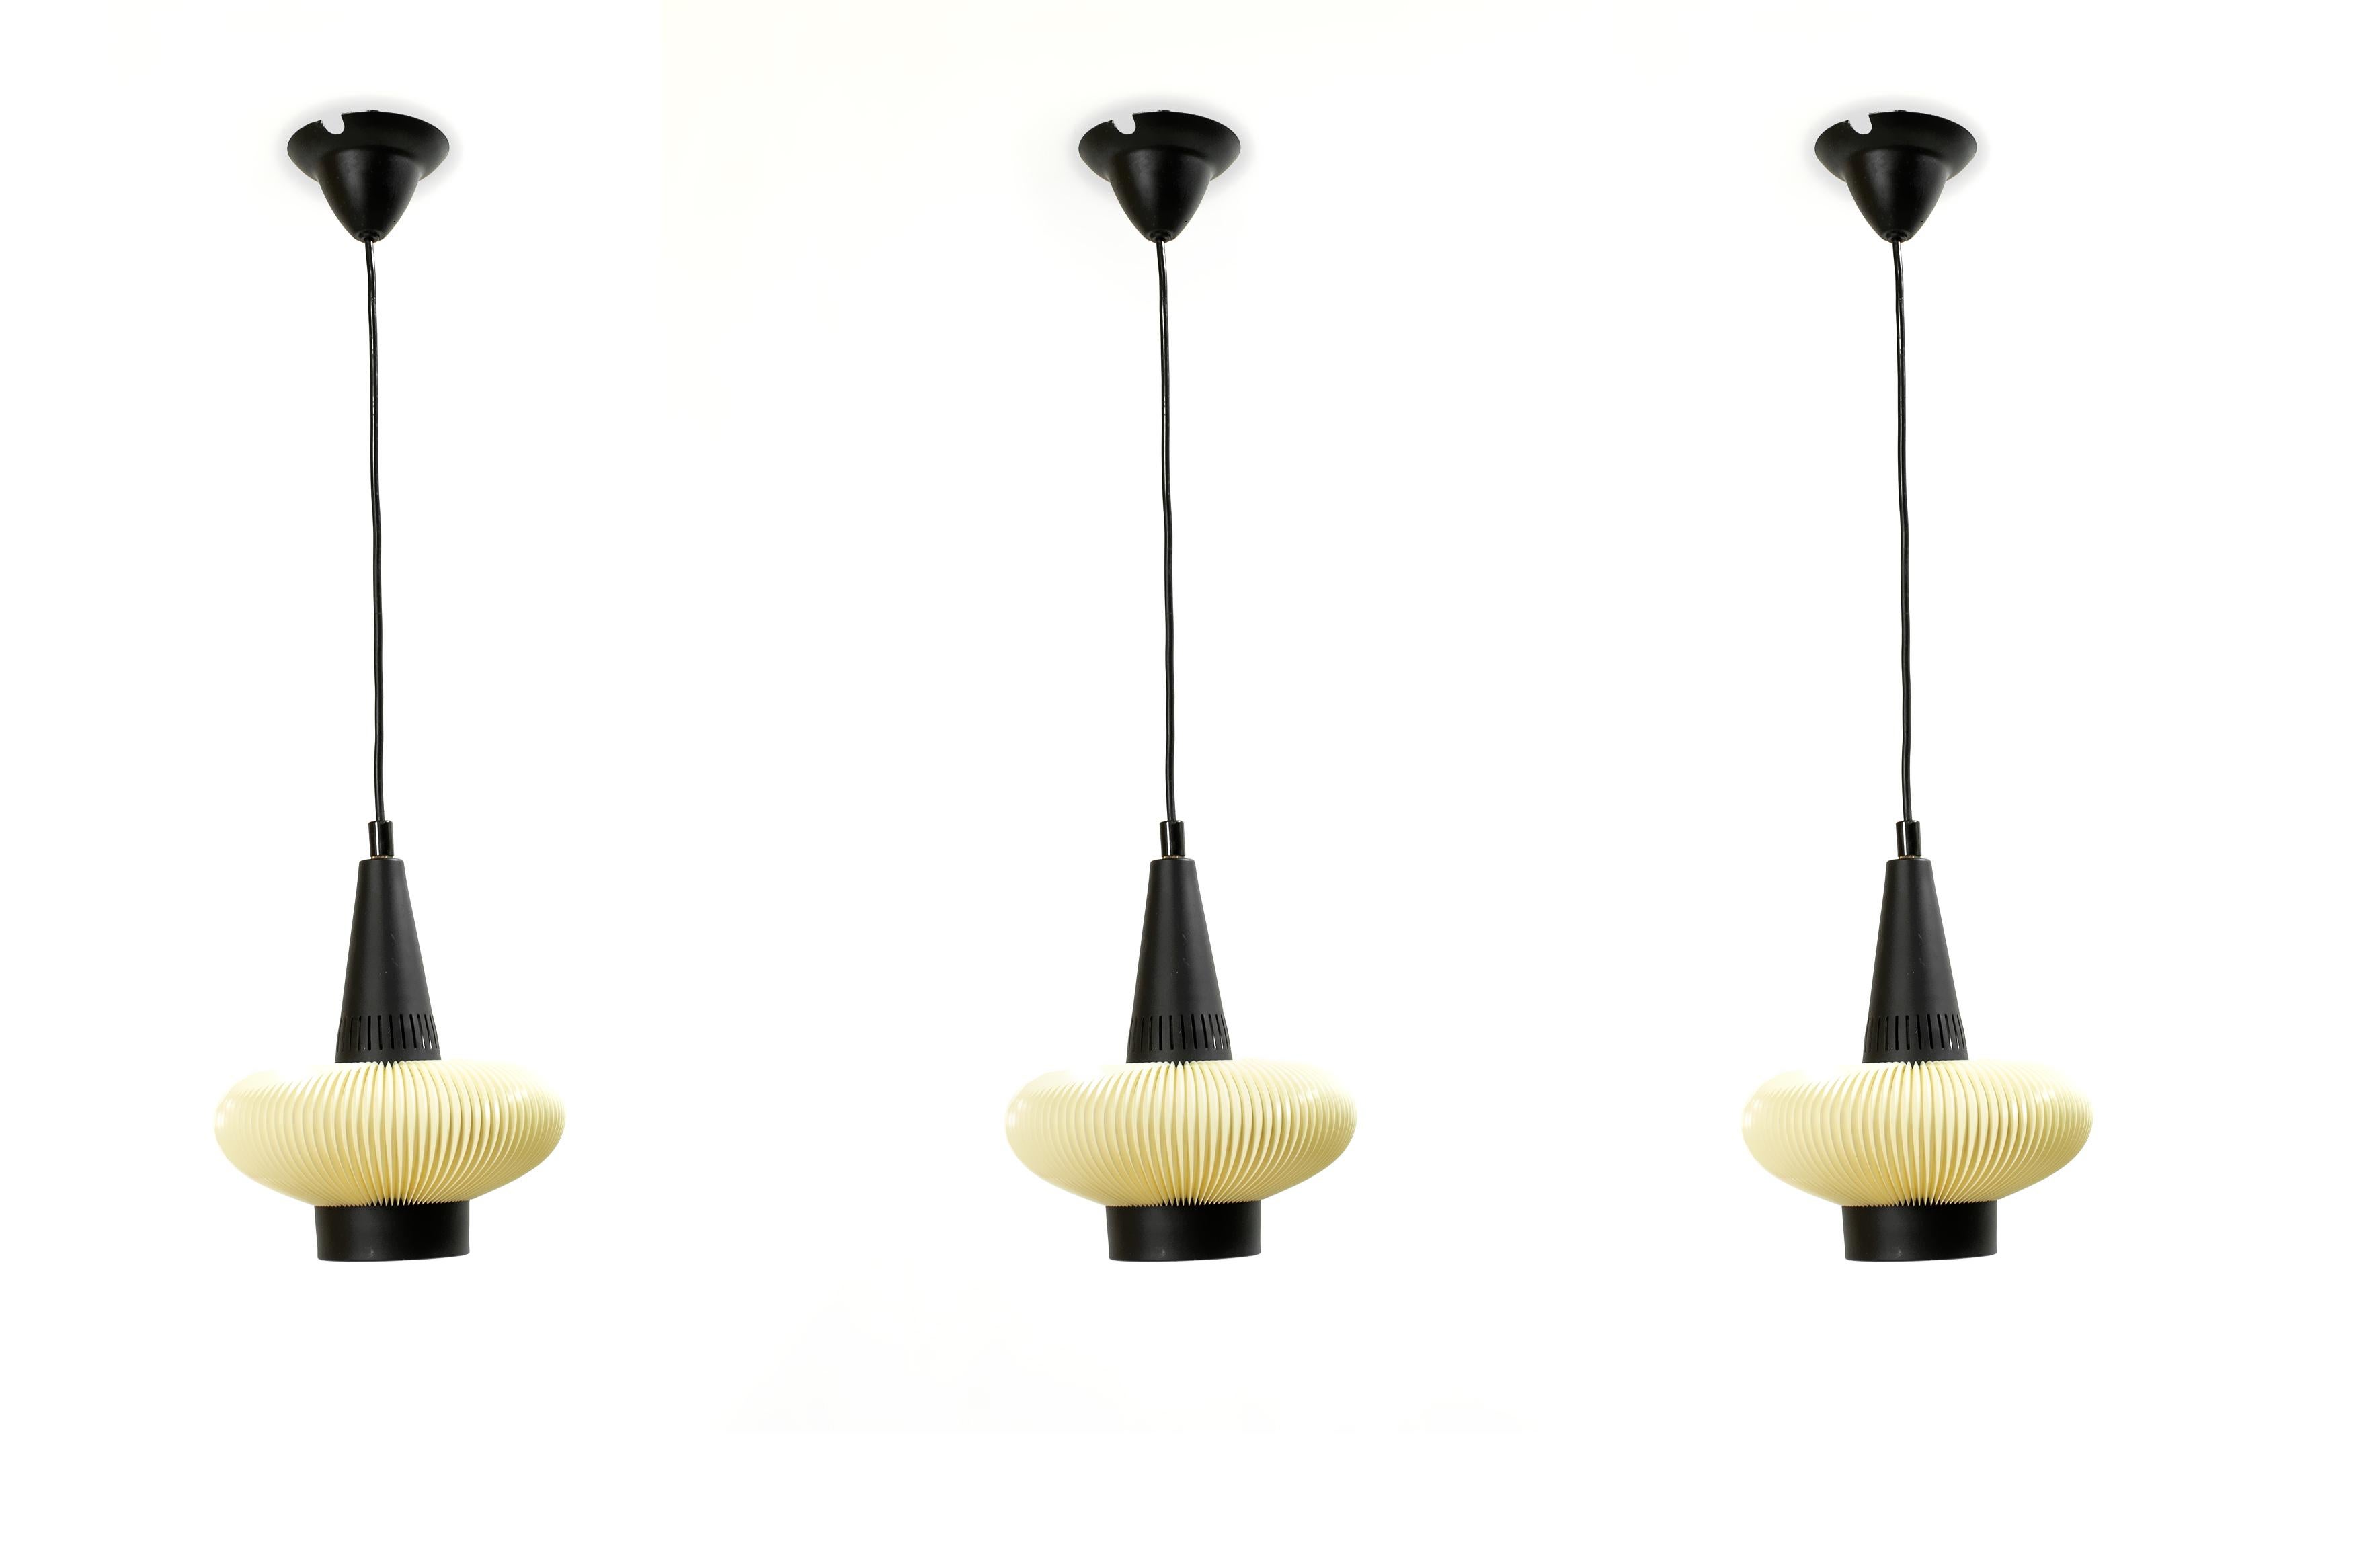 Wonderful set of three ceiling pendants in painted steel and acrylic shades. Designed and made in Norway by T. Røstad & Co. from circa 1960s second half. The lamps are fully working and in very good vintage condition. Each lamp is fitted with one